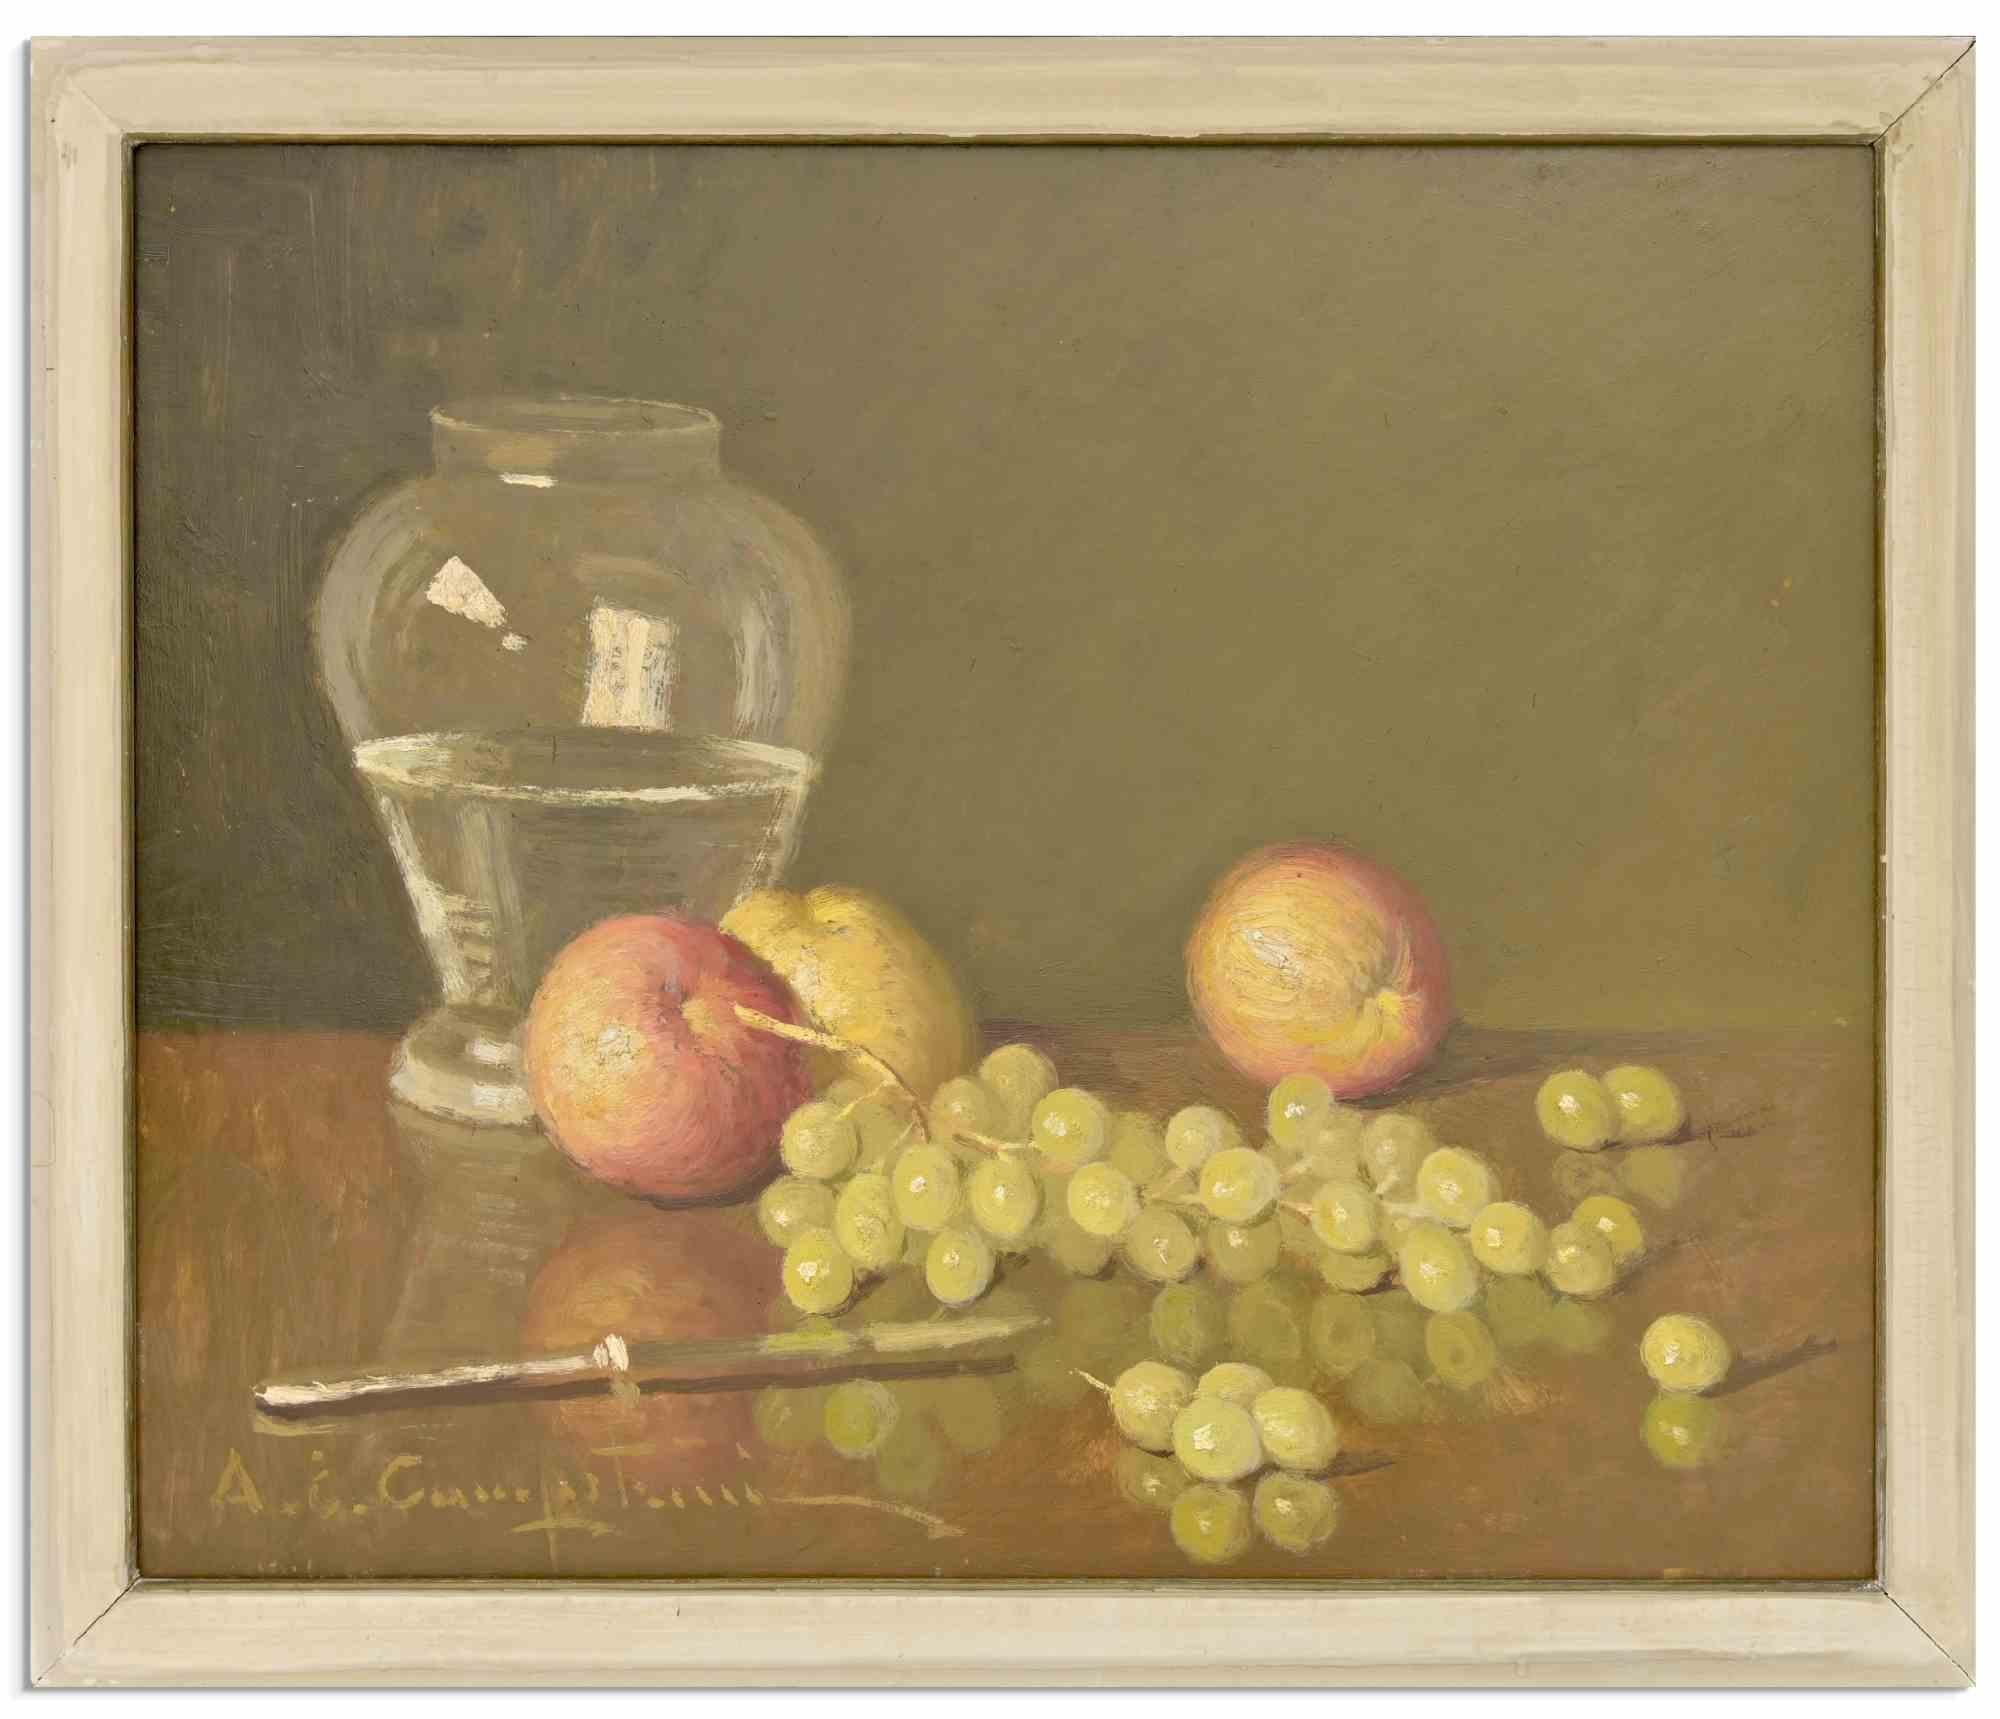 Still Life is an artwork realized by Ernesto Alcide Campestrini (1897-1983). 

Oil on Table.

cm 50x60; 55 x 66 cm with frame. 

Hand signed in the lower left margin.

Good condition.

Alcide Ernesto Campestrini was born in Milan, where the family